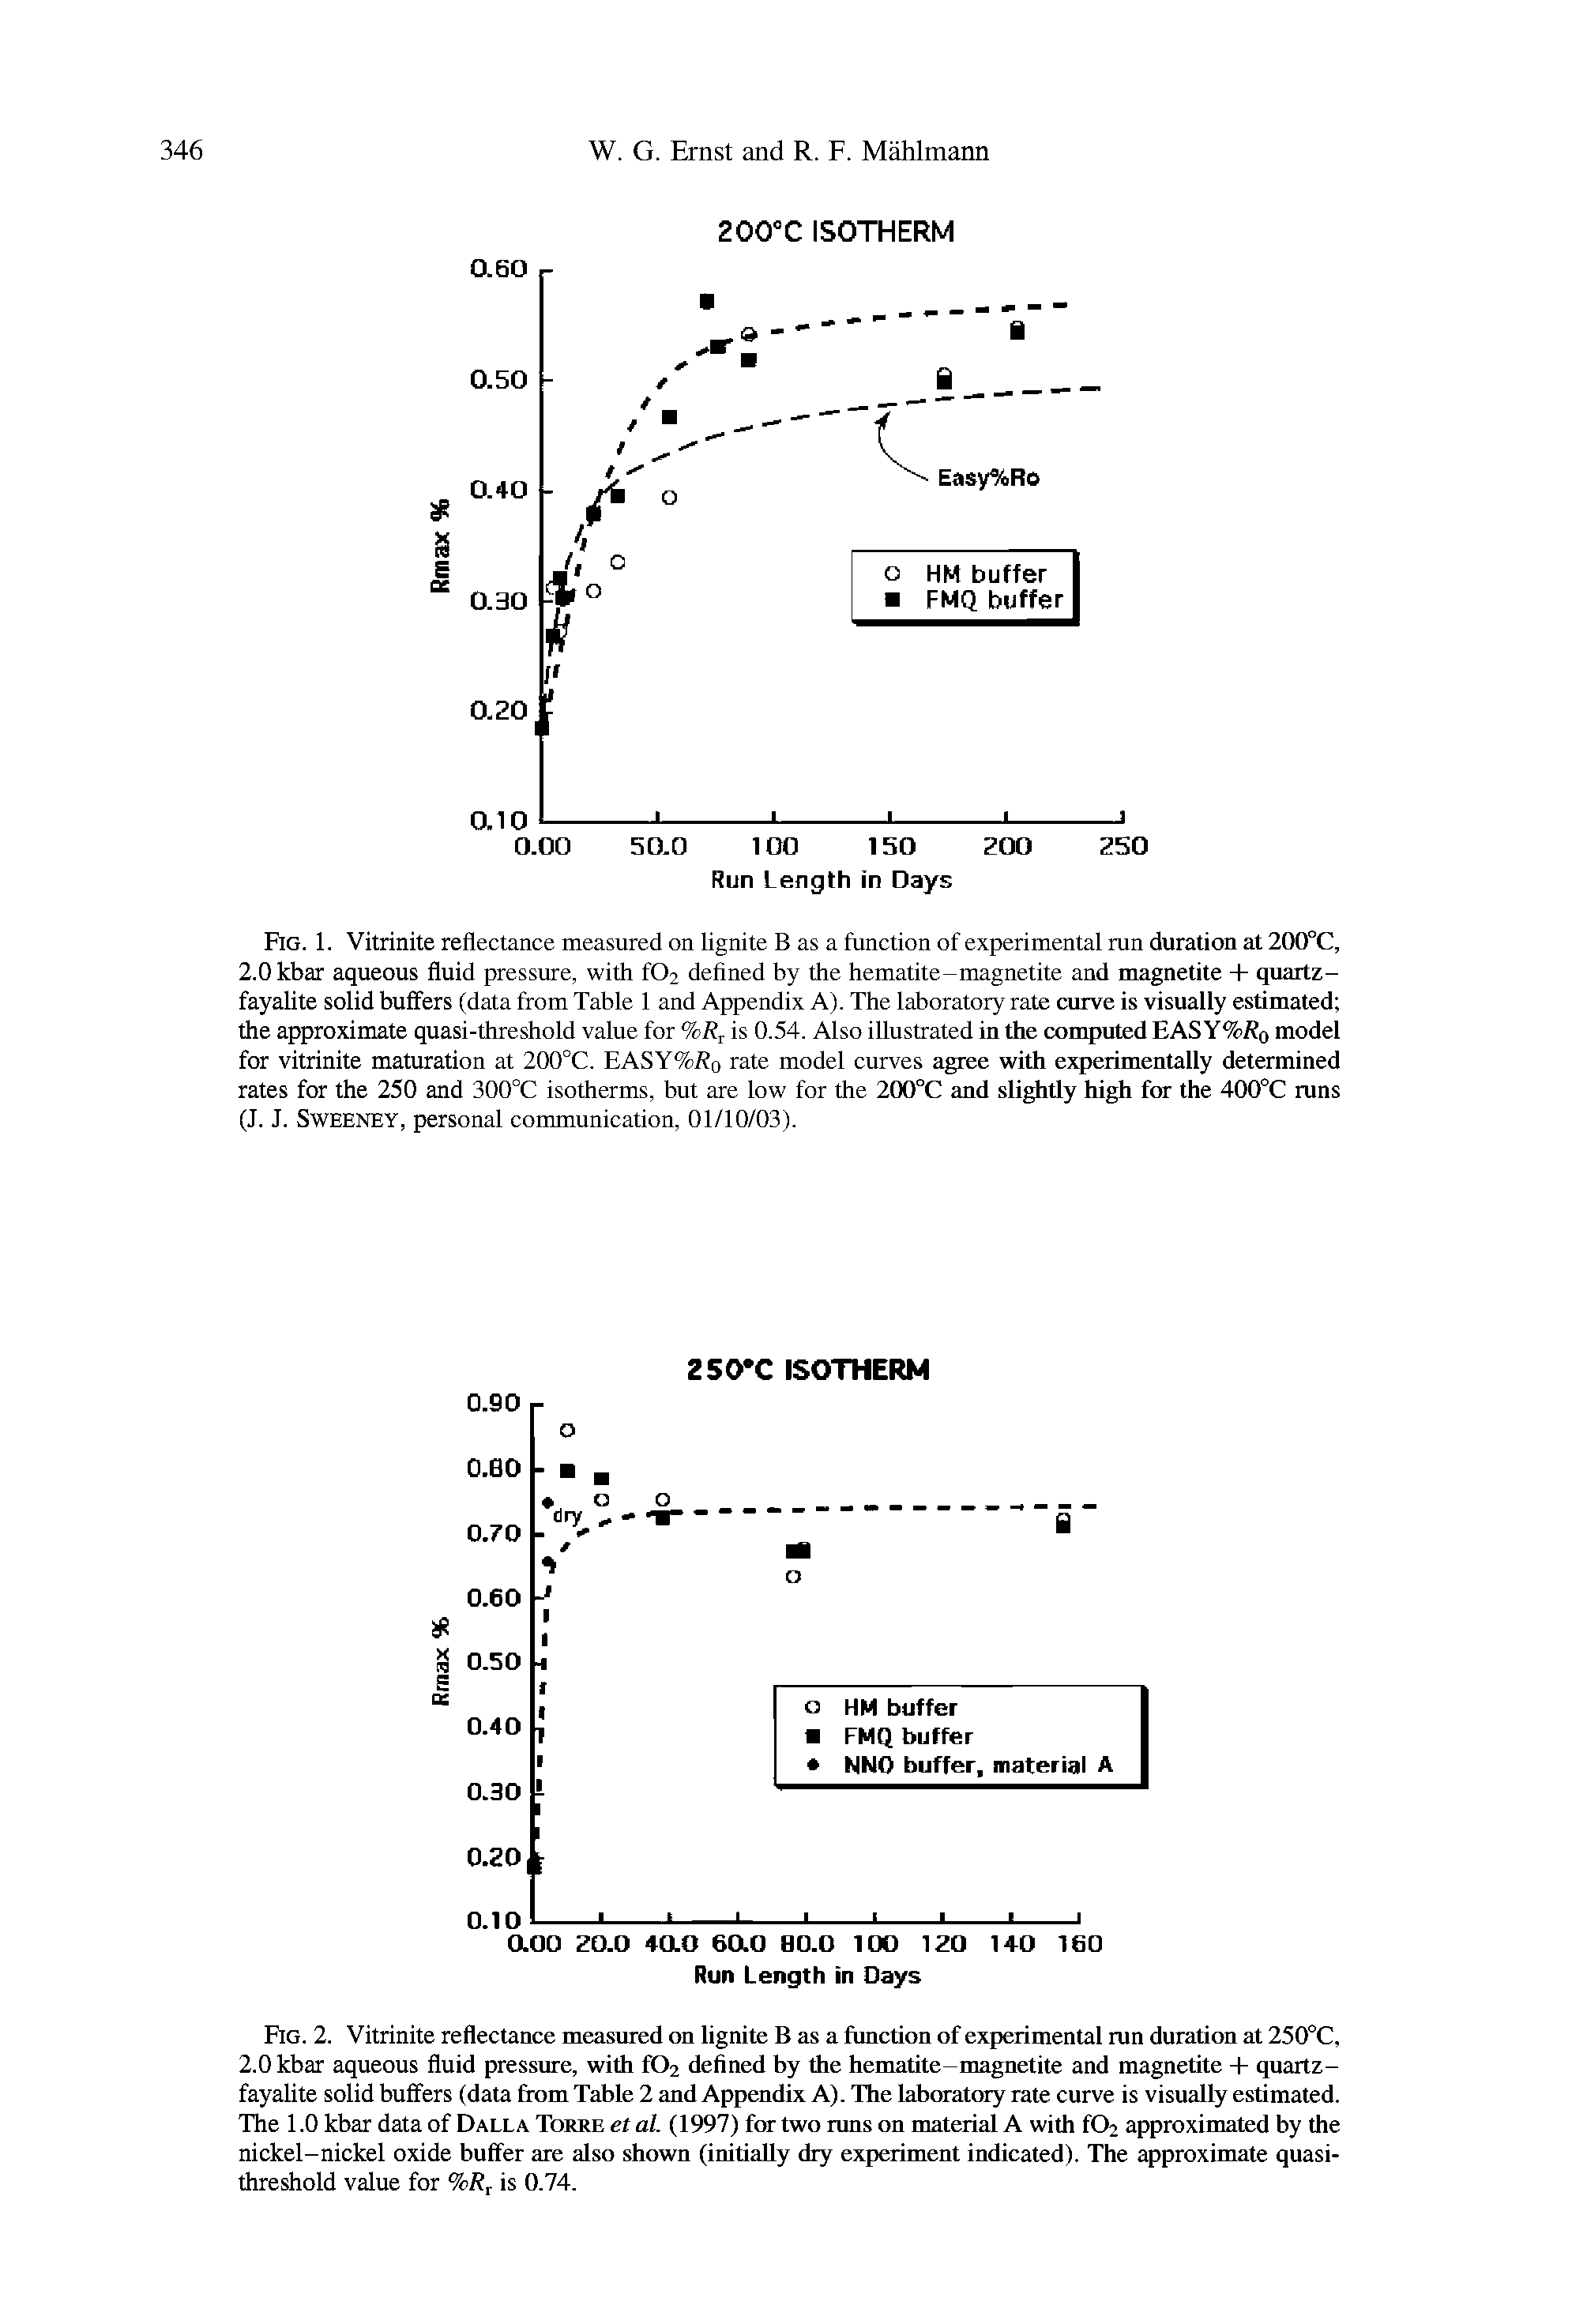 Fig. 1. Vitrinite reflectance measured on lignite B as a function of experimental run duration at 200°C, 2.0 kbar aqueous fluid pressure, with t02 defined by the hematite-magnetite and magnetite + quartz-fayalite solid buffers (data from Table 1 and Appendix A). The laboratory rate curve is visually estimated the approximate quasi-threshold value for %R is 0.54. Also illustrated in the computed EASY%Ro model for vitrinite maturation at 200°C. EASY%Rq rate model curves agree with experimentally determined rates for the 250 and 300°C isotherms, but are low for the 200°C and slightly high for the 400 0 runs (J. J. Sweeney, personal communication, 01/10/03).